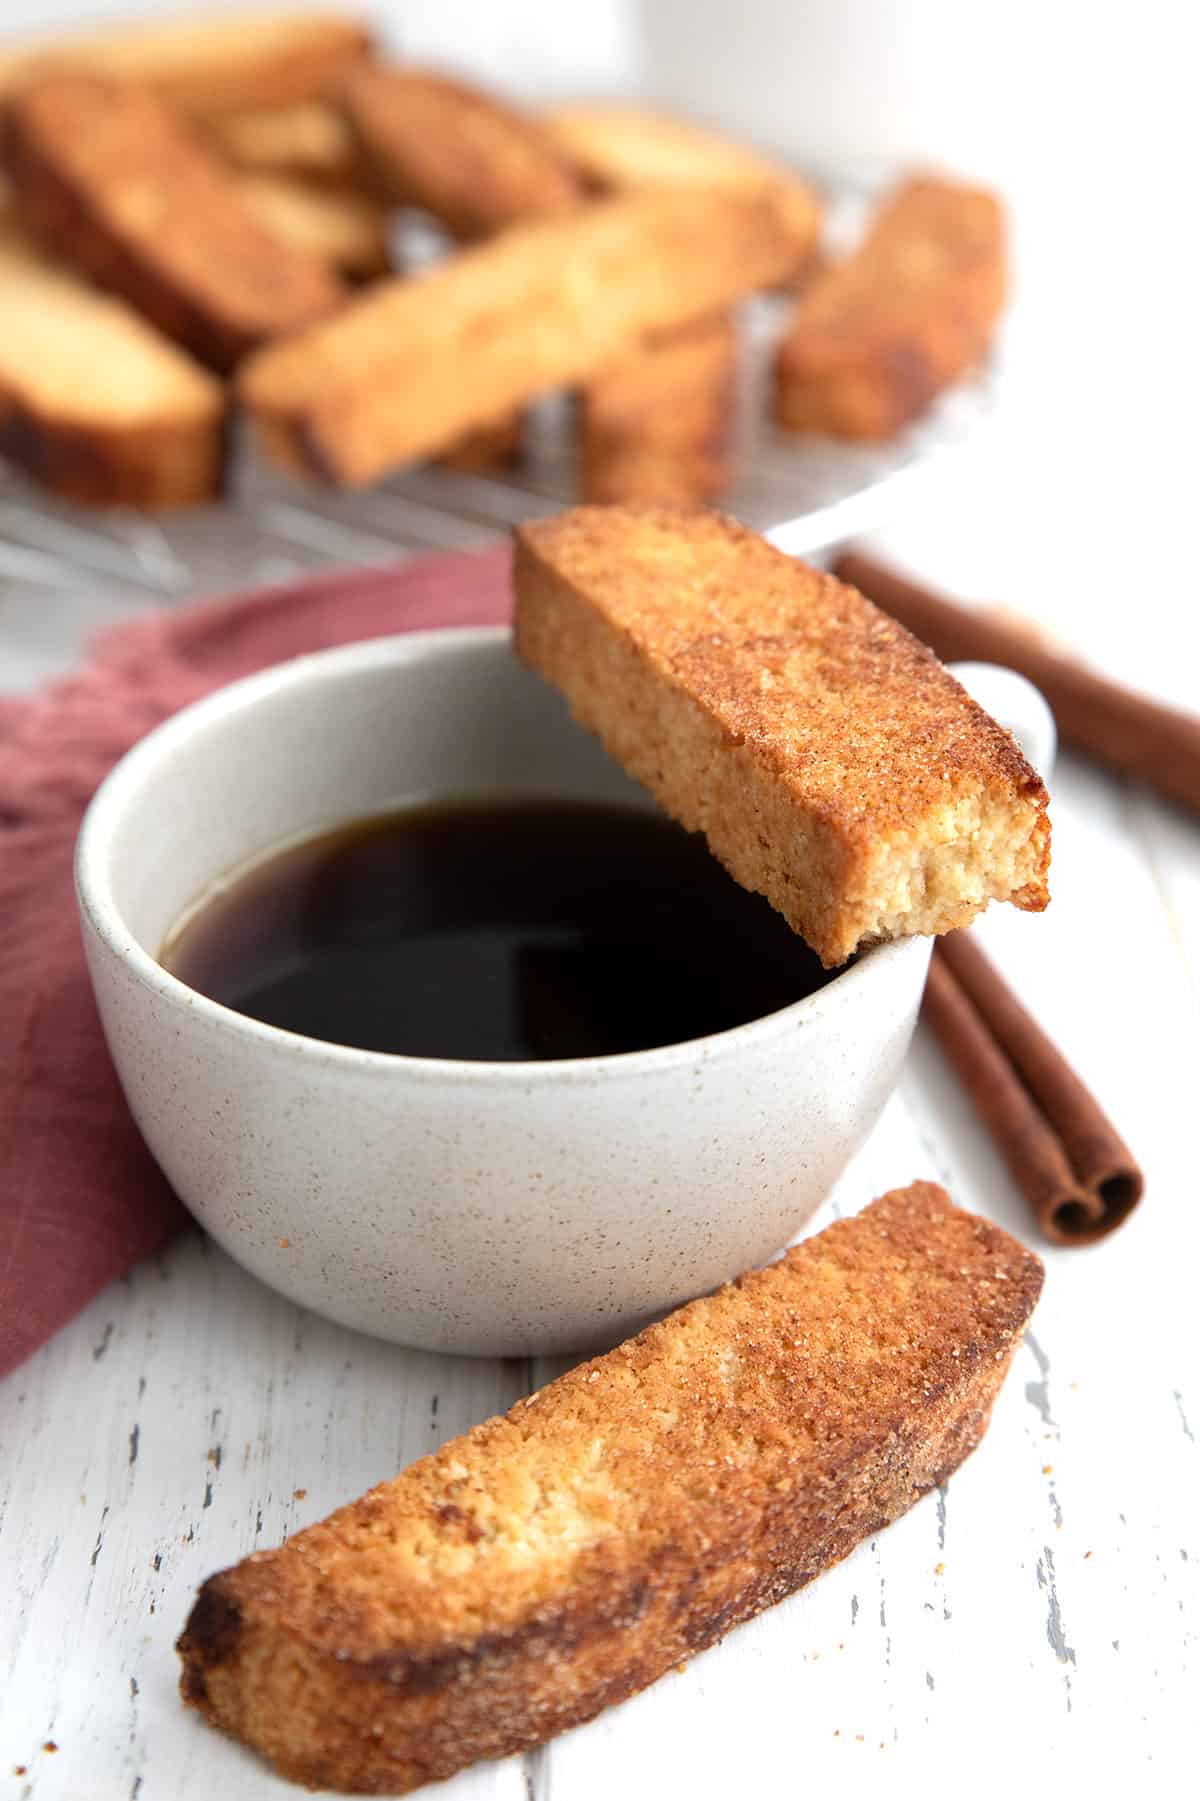 Keto biscotti around a cup of coffee with a bite taken out of one.